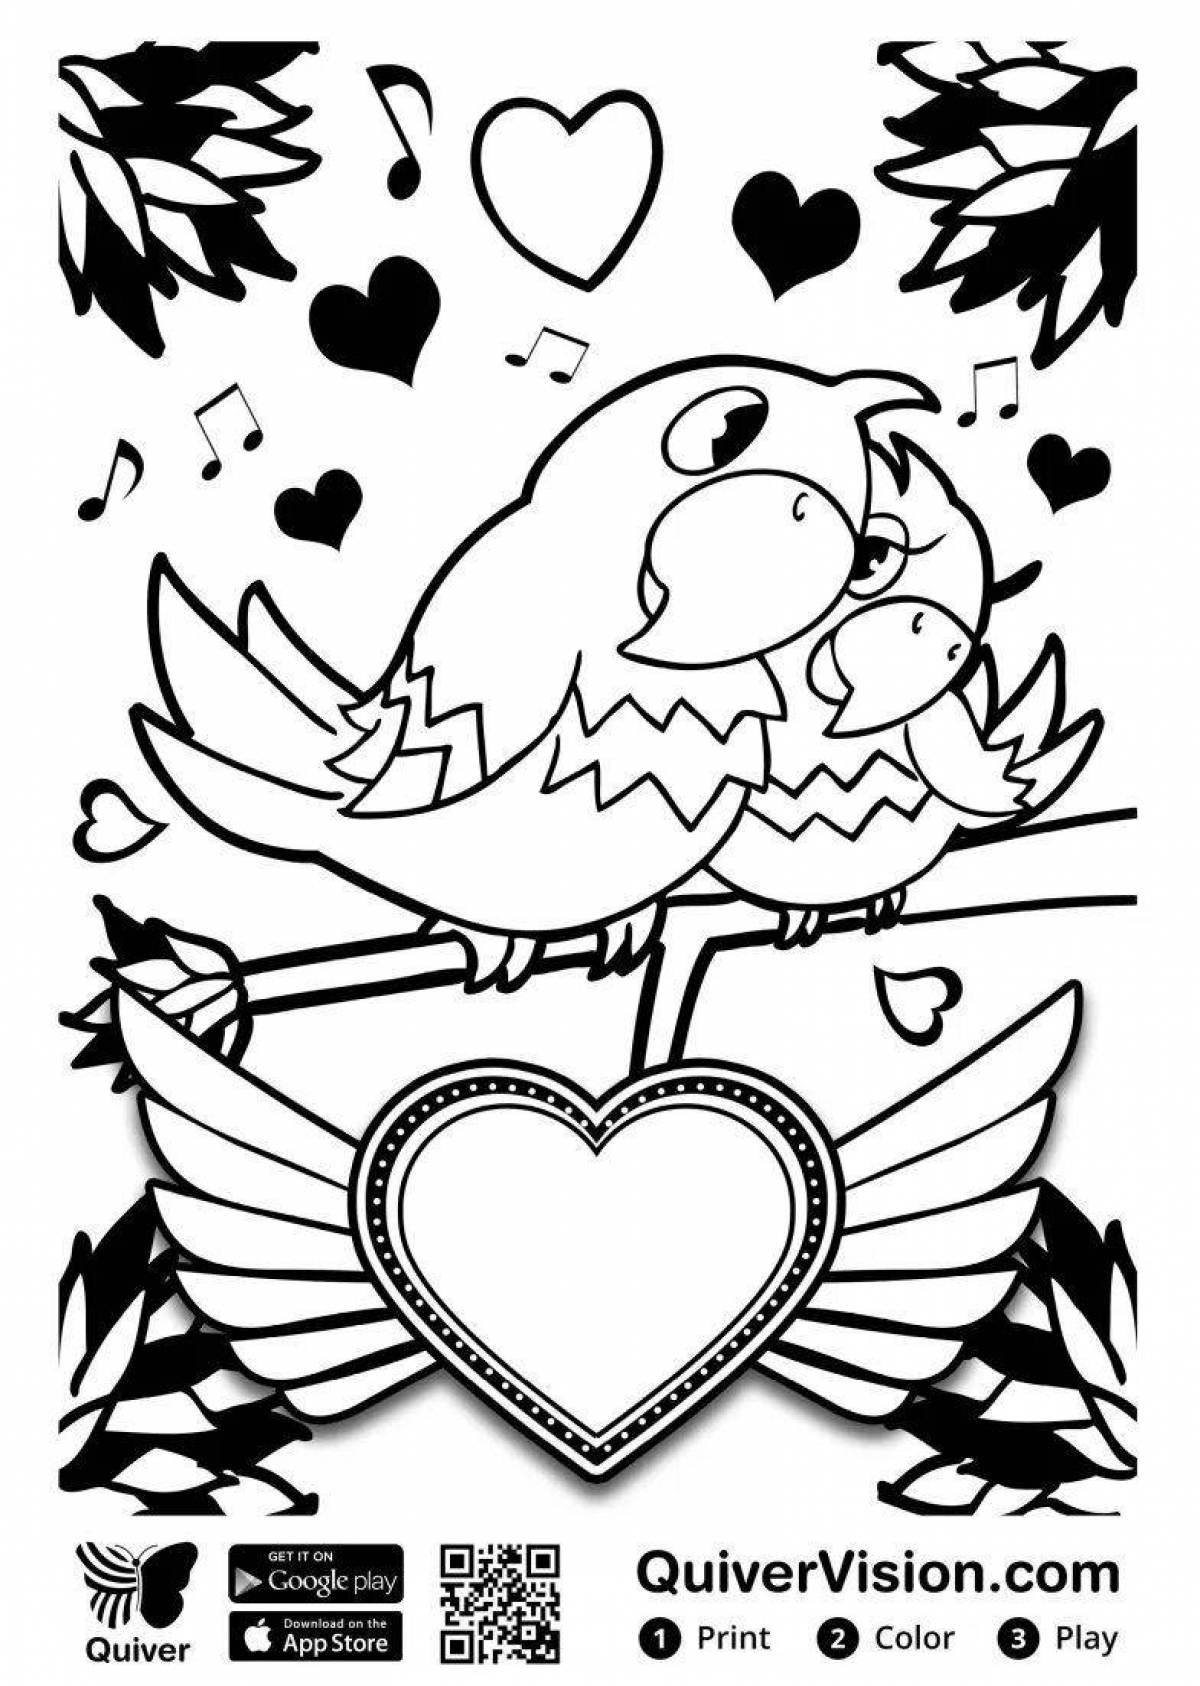 Inviting quiver coloring page